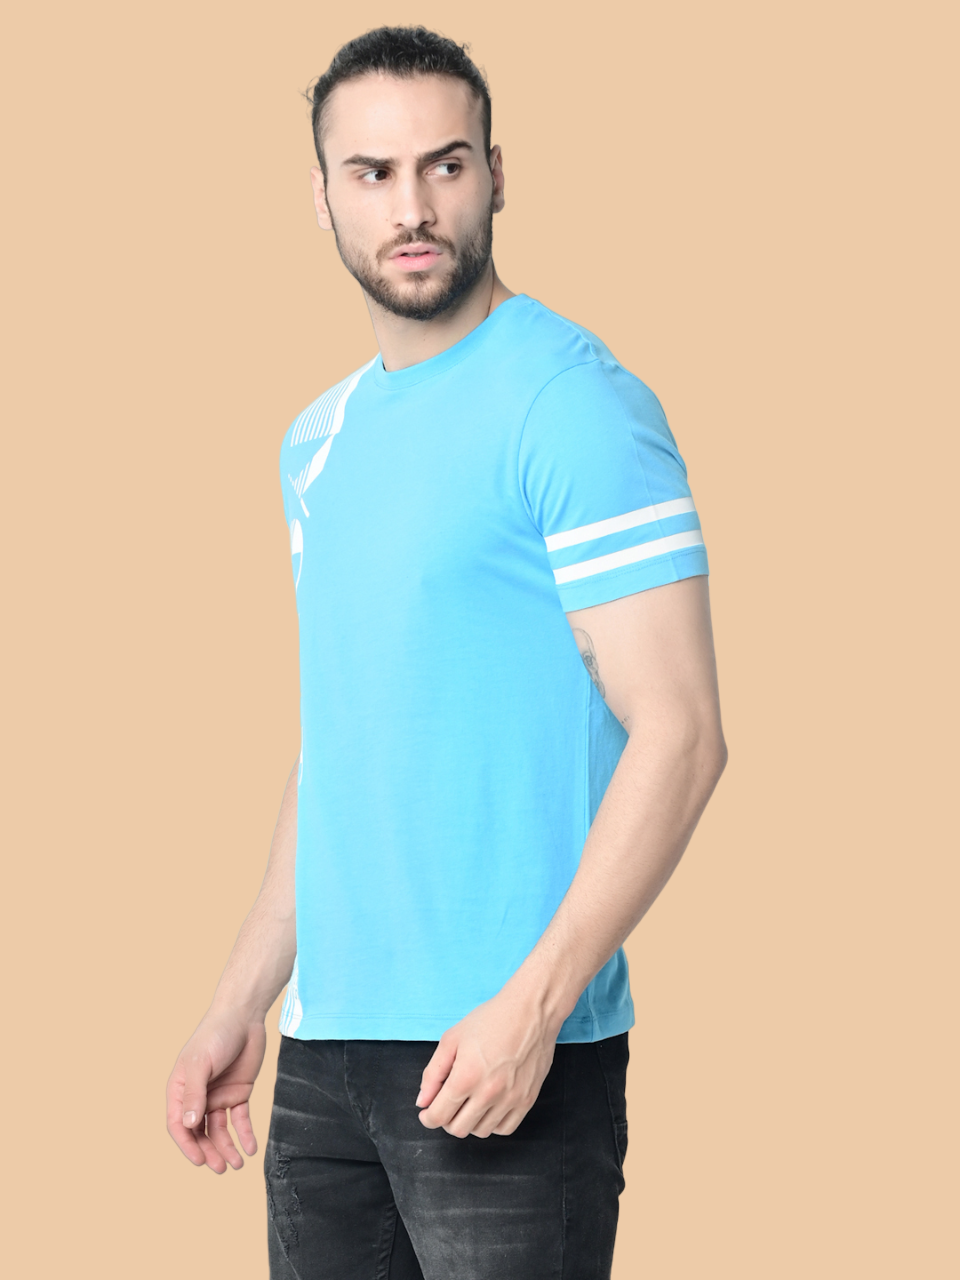 Flawless Men's 100% Cotton Sky-Blue T-Shirt Being Flawless